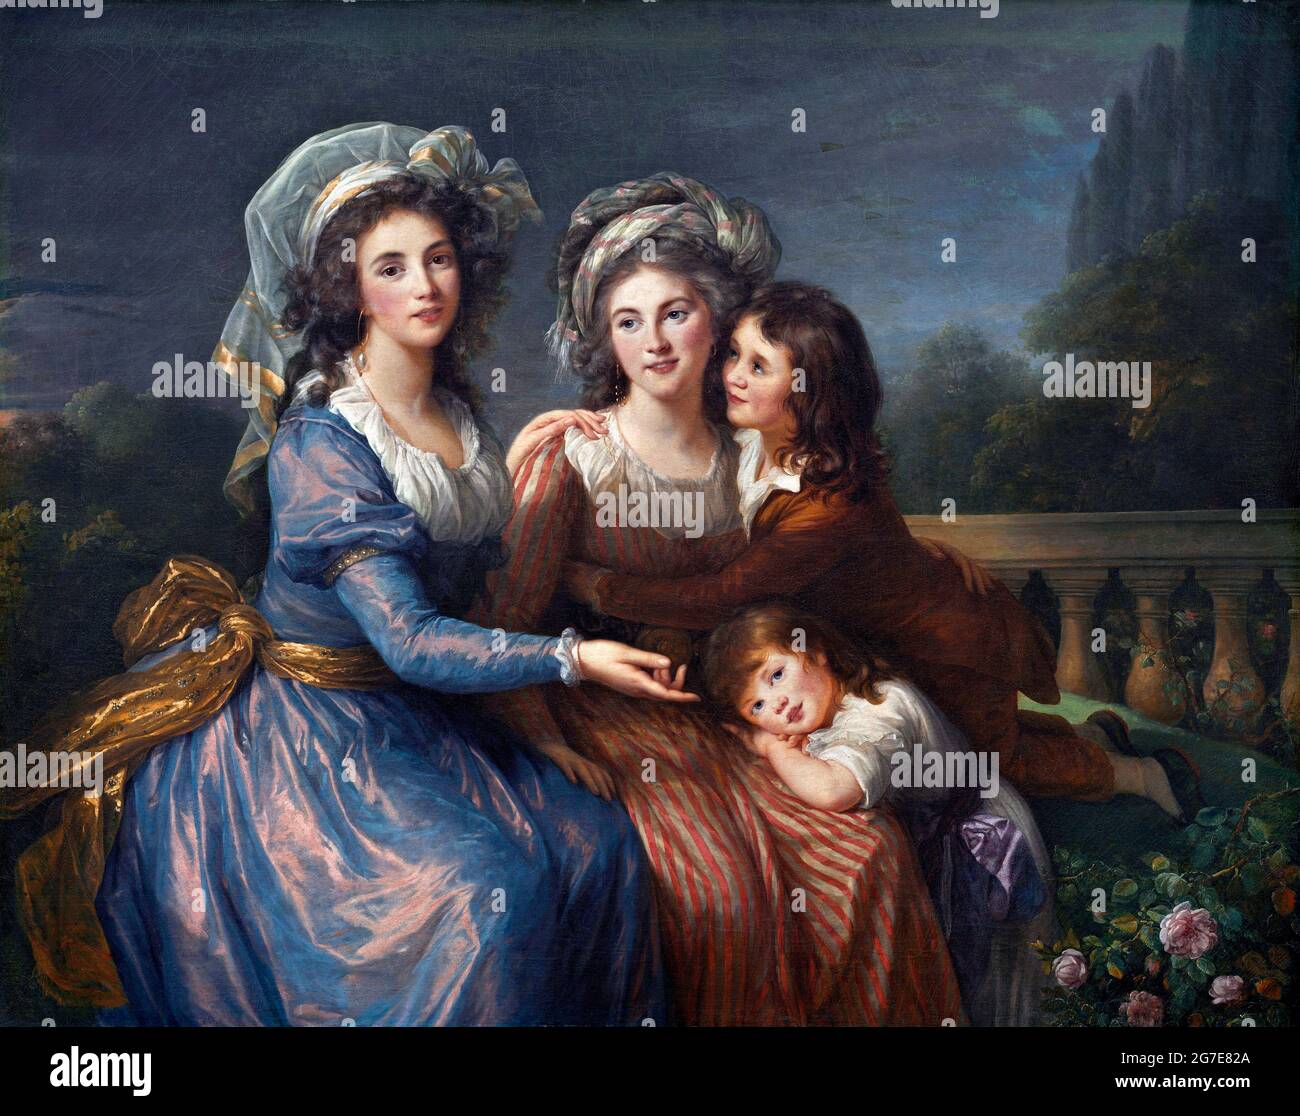 The Marquise de Pezay, and the Marquise de Rougé with Her Sons Alexis and Adrien by Élisabeth Vigée Le Brun, oil on canvas, 1787 Stock Photo